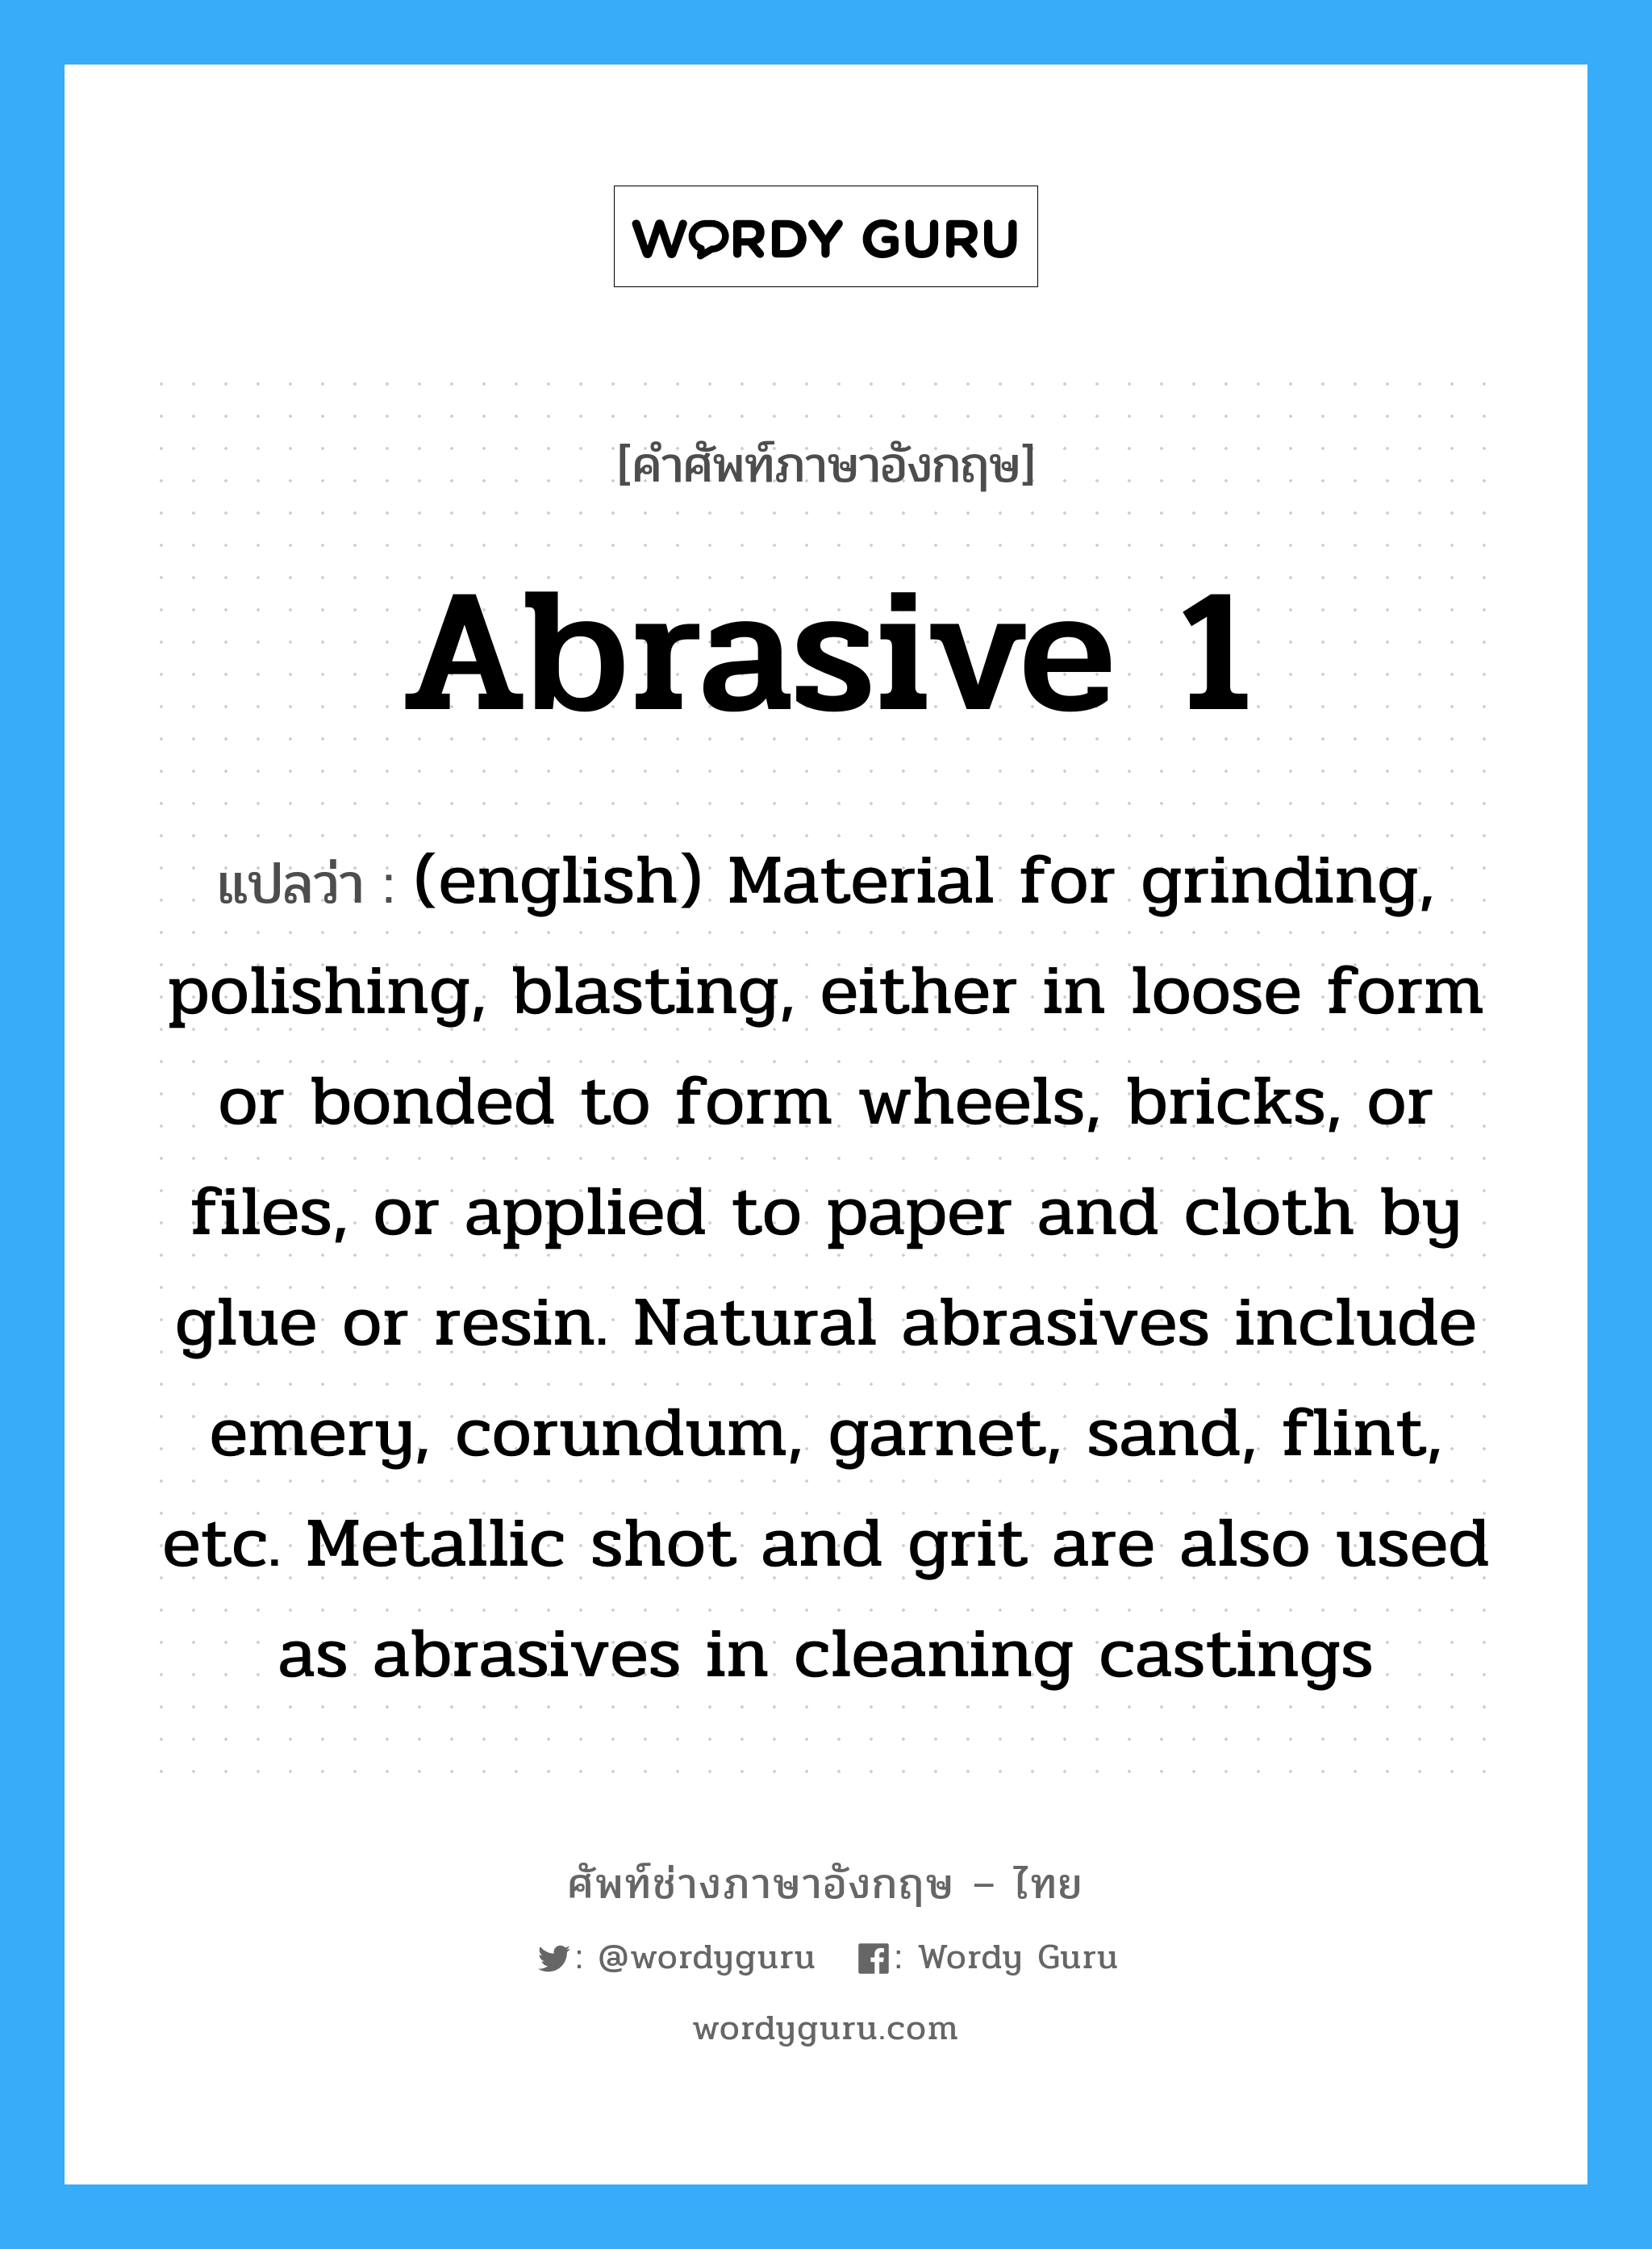 Abrasive 1 แปลว่า?, คำศัพท์ช่างภาษาอังกฤษ - ไทย Abrasive 1 คำศัพท์ภาษาอังกฤษ Abrasive 1 แปลว่า (english) Material for grinding, polishing, blasting, either in loose form or bonded to form wheels, bricks, or files, or applied to paper and cloth by glue or resin. Natural abrasives include emery, corundum, garnet, sand, flint, etc. Metallic shot and grit are also used as abrasives in cleaning castings